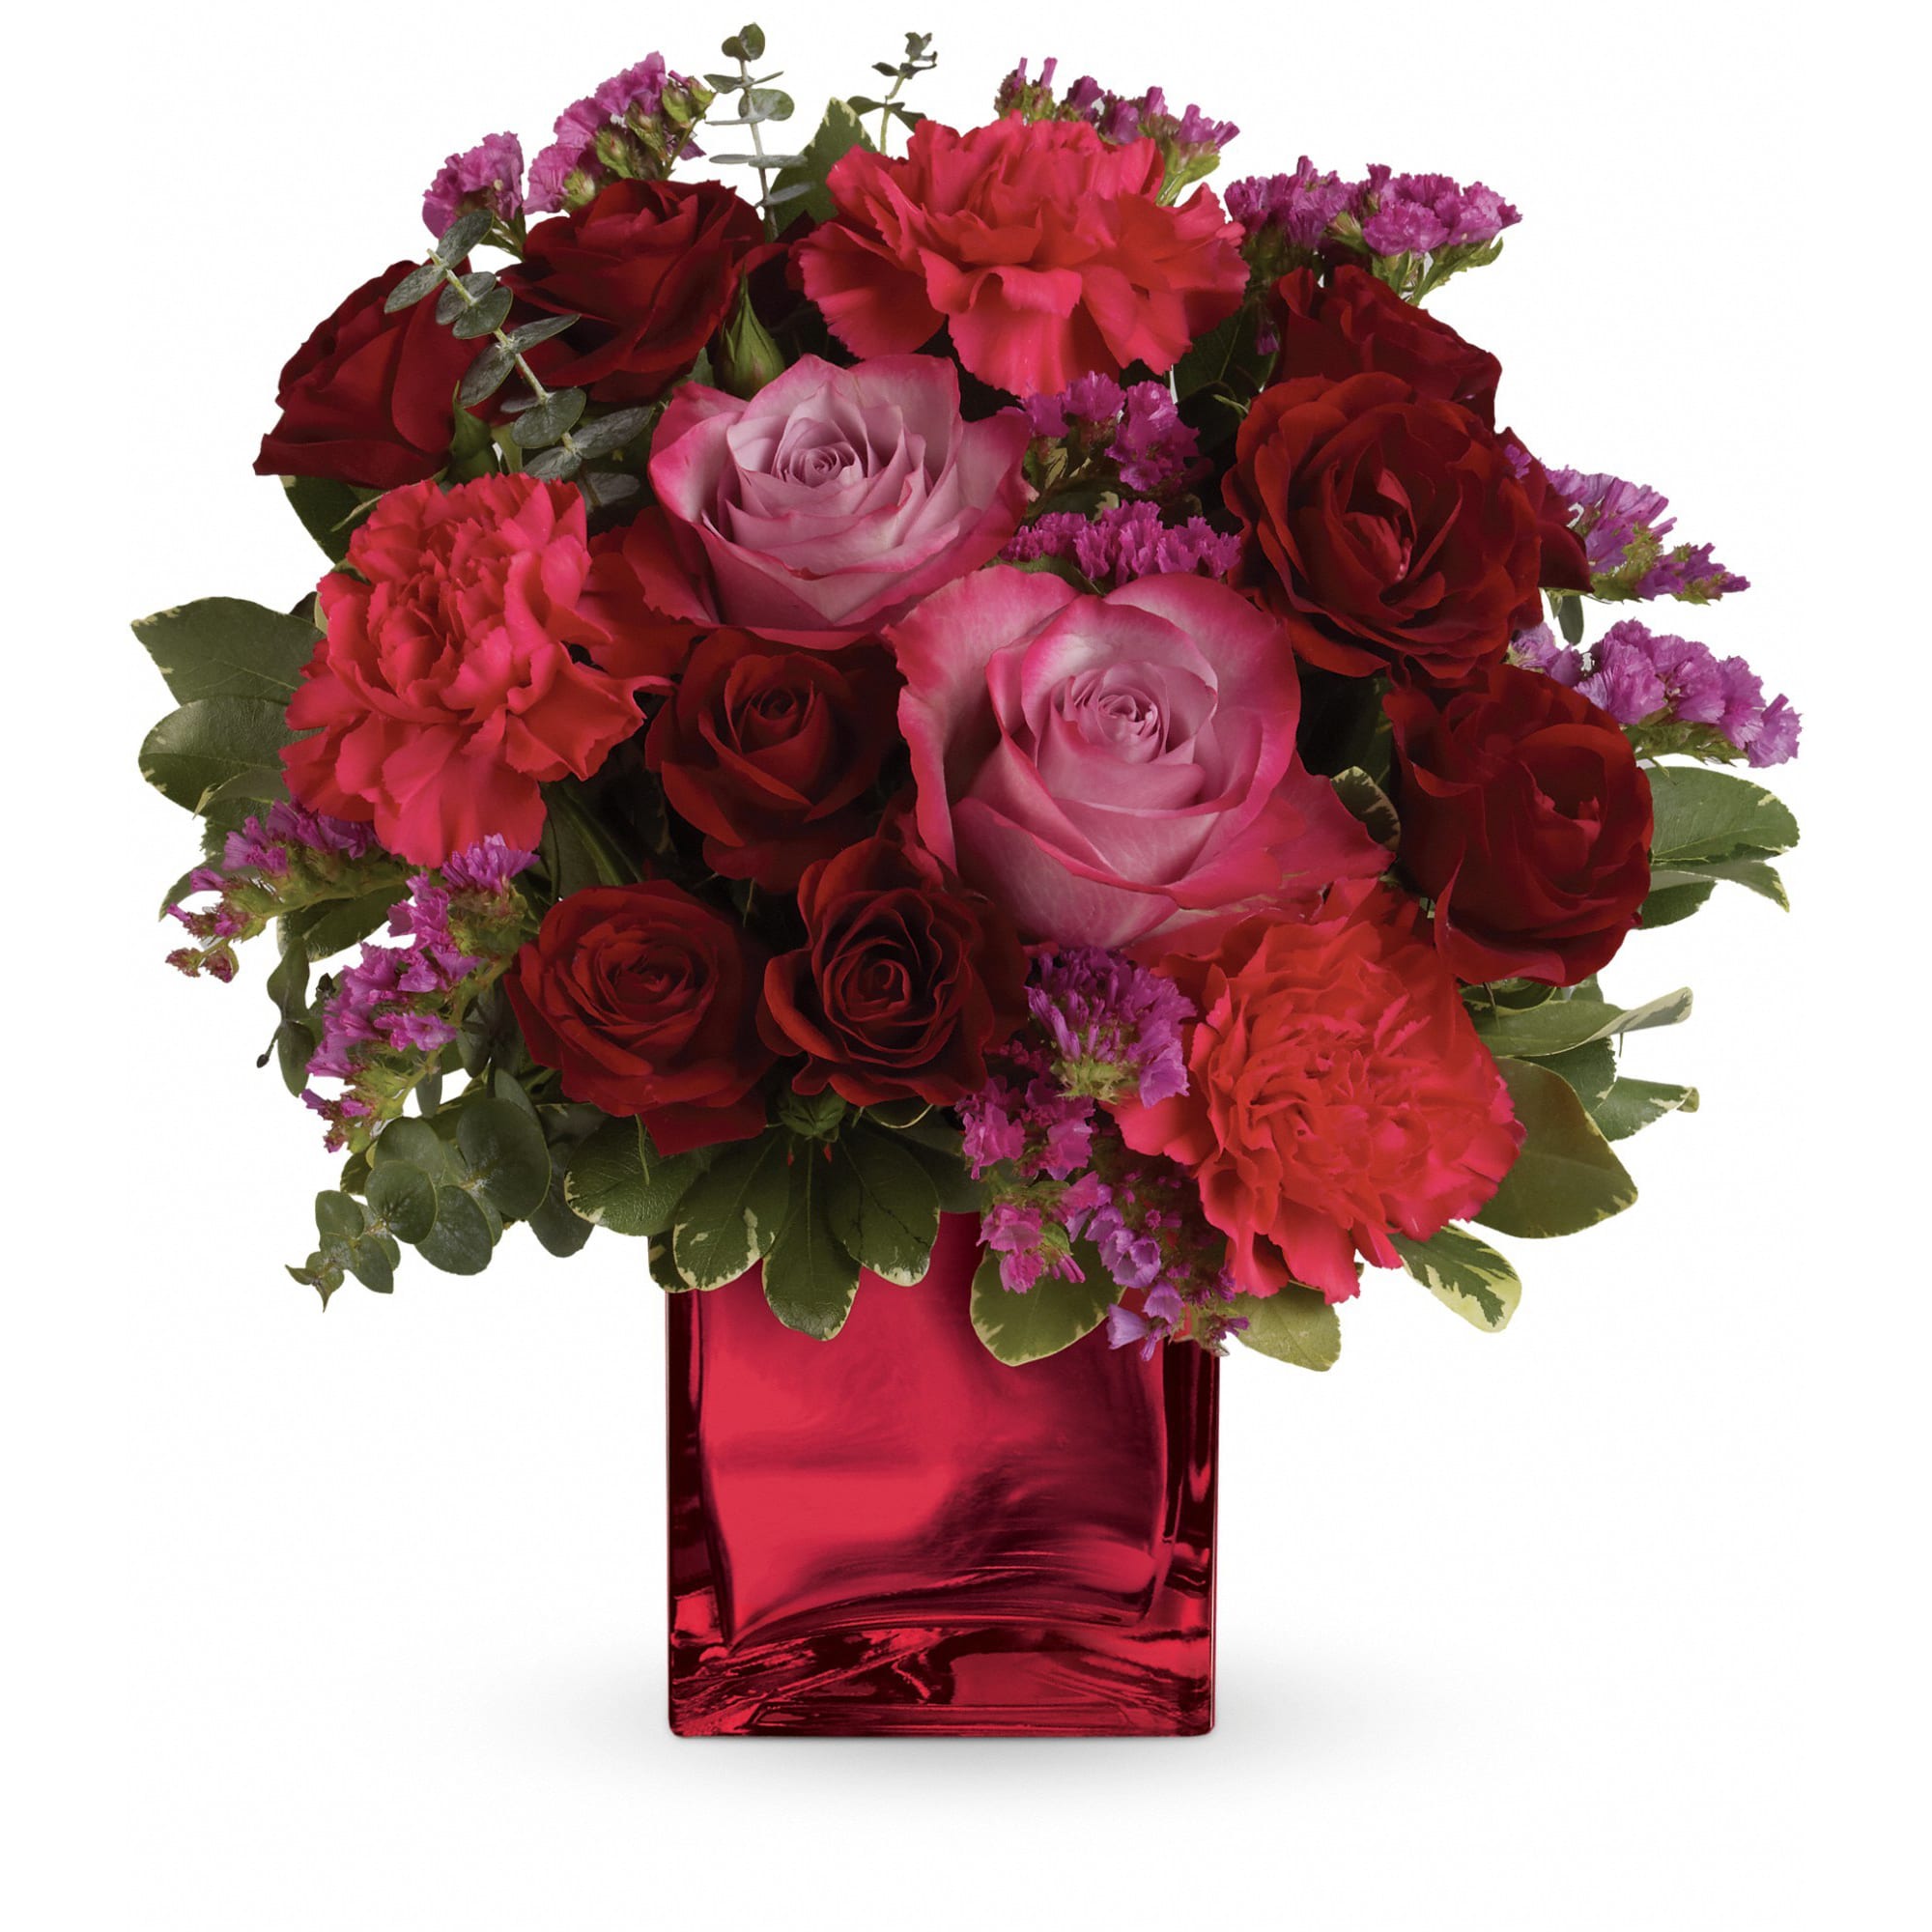 Teleflora's Ruby Rapture Bouquet - Enrapture your paramour with this dramatic display of red and lavender roses. This bouquet is arranged in a red, mirrored glass cube - a shining keepsake they'll treasure forever.  